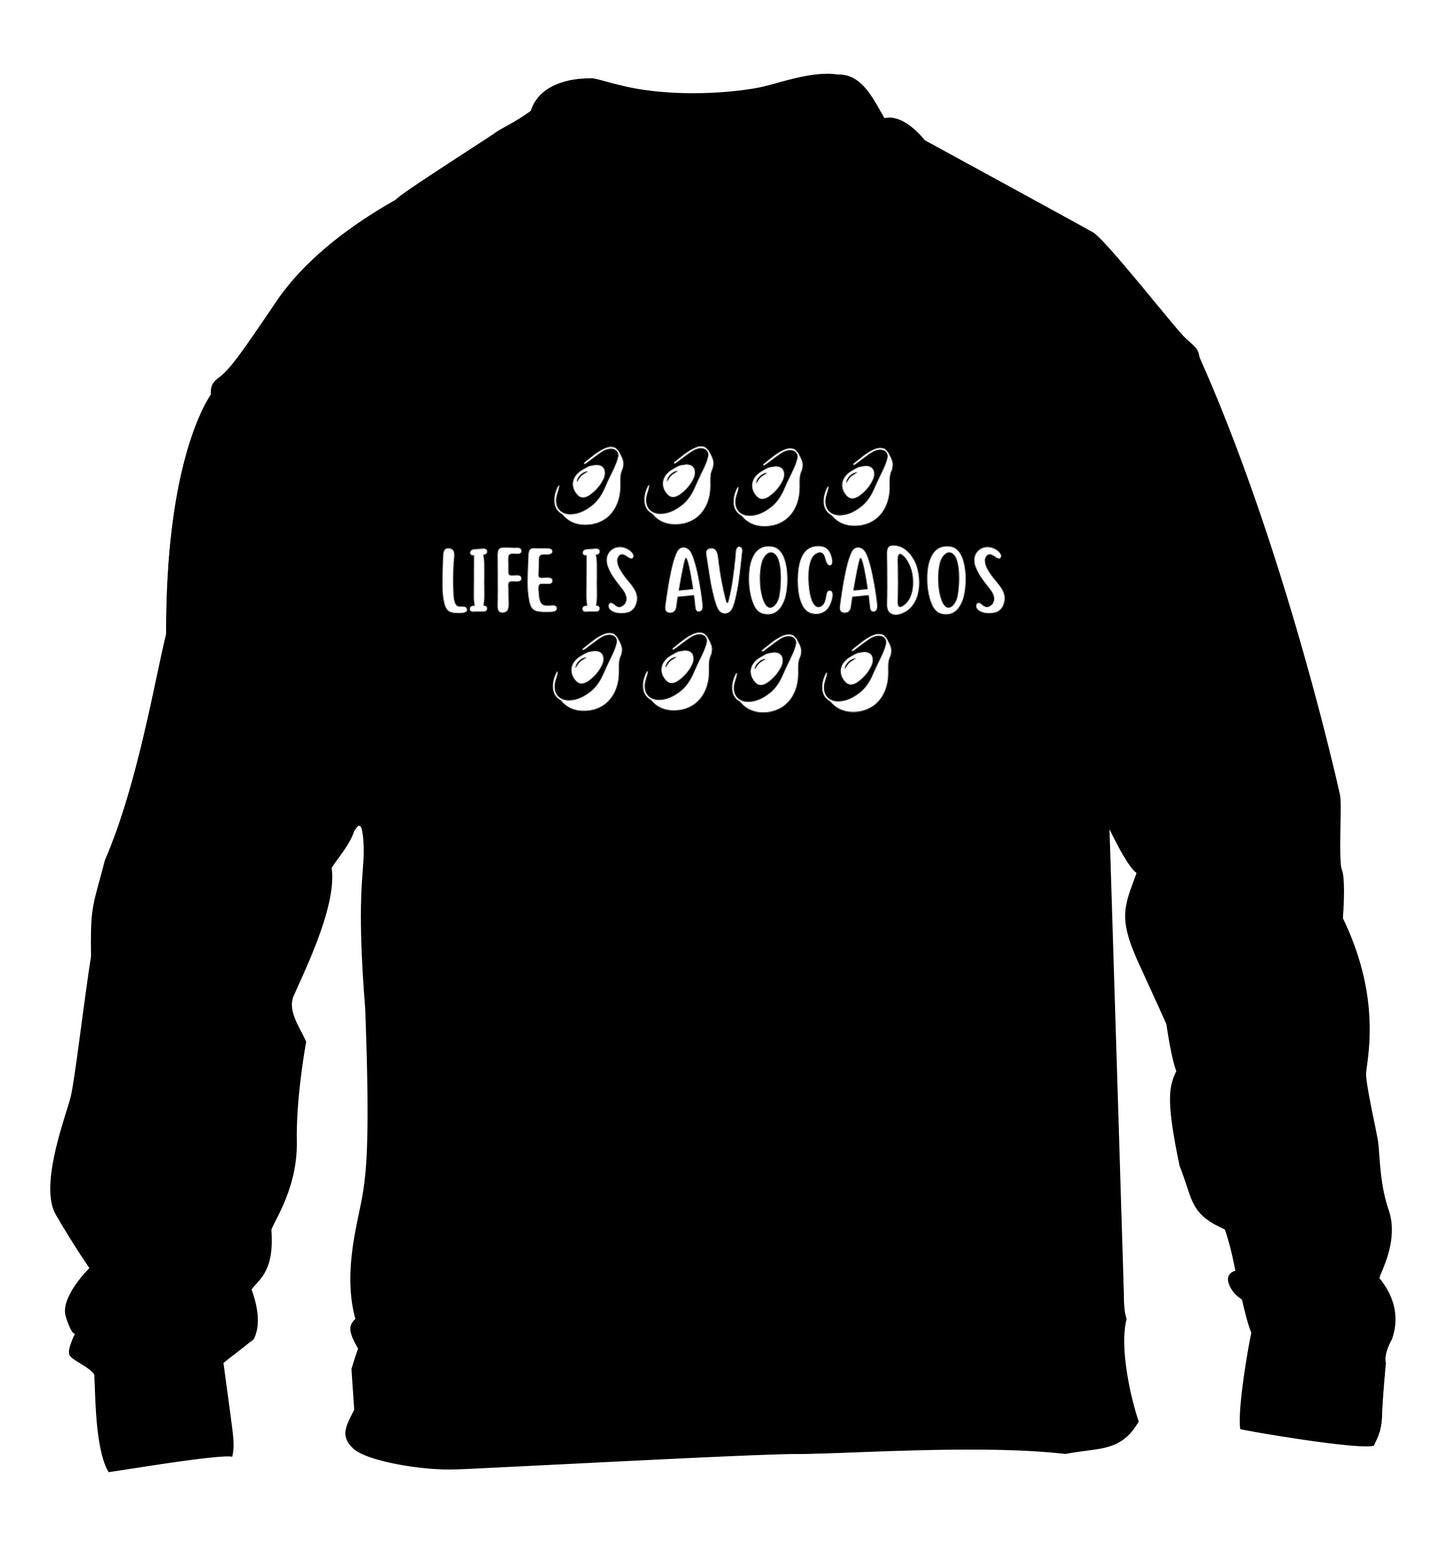 Life is avocados children's black sweater 12-14 Years